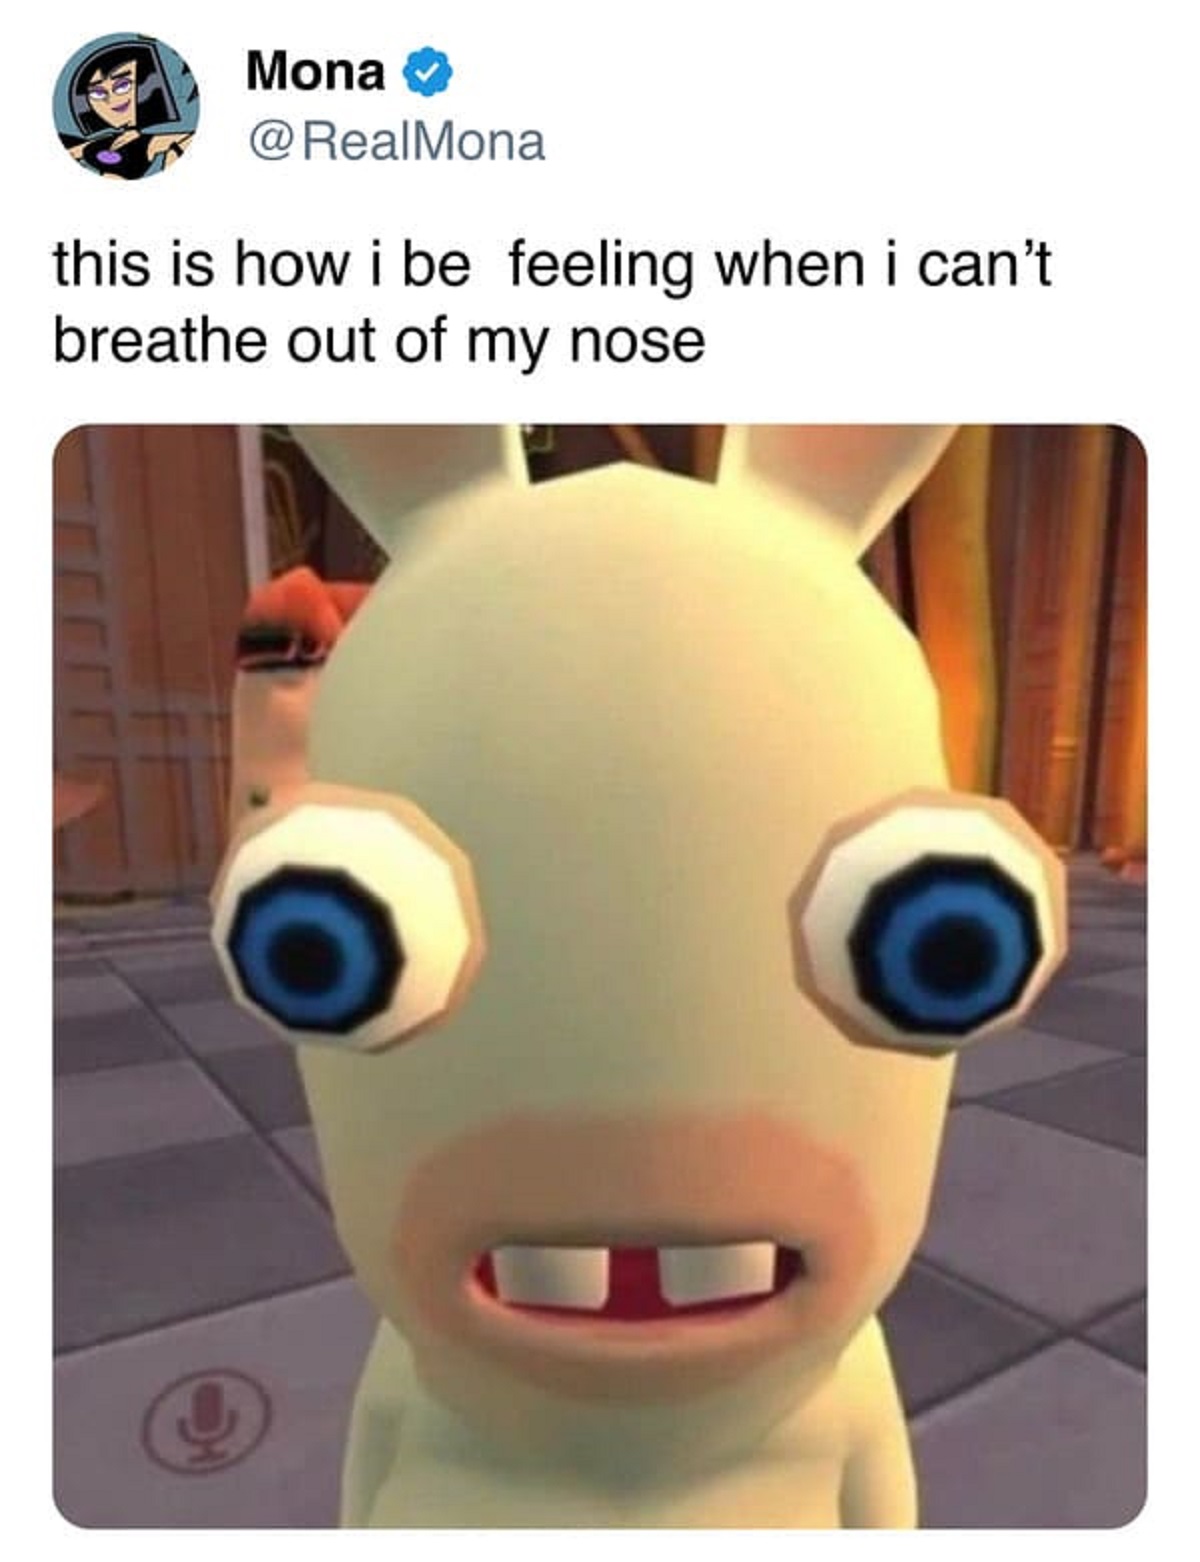 head - Mona this is how i be feeling when i can't breathe out of my nose